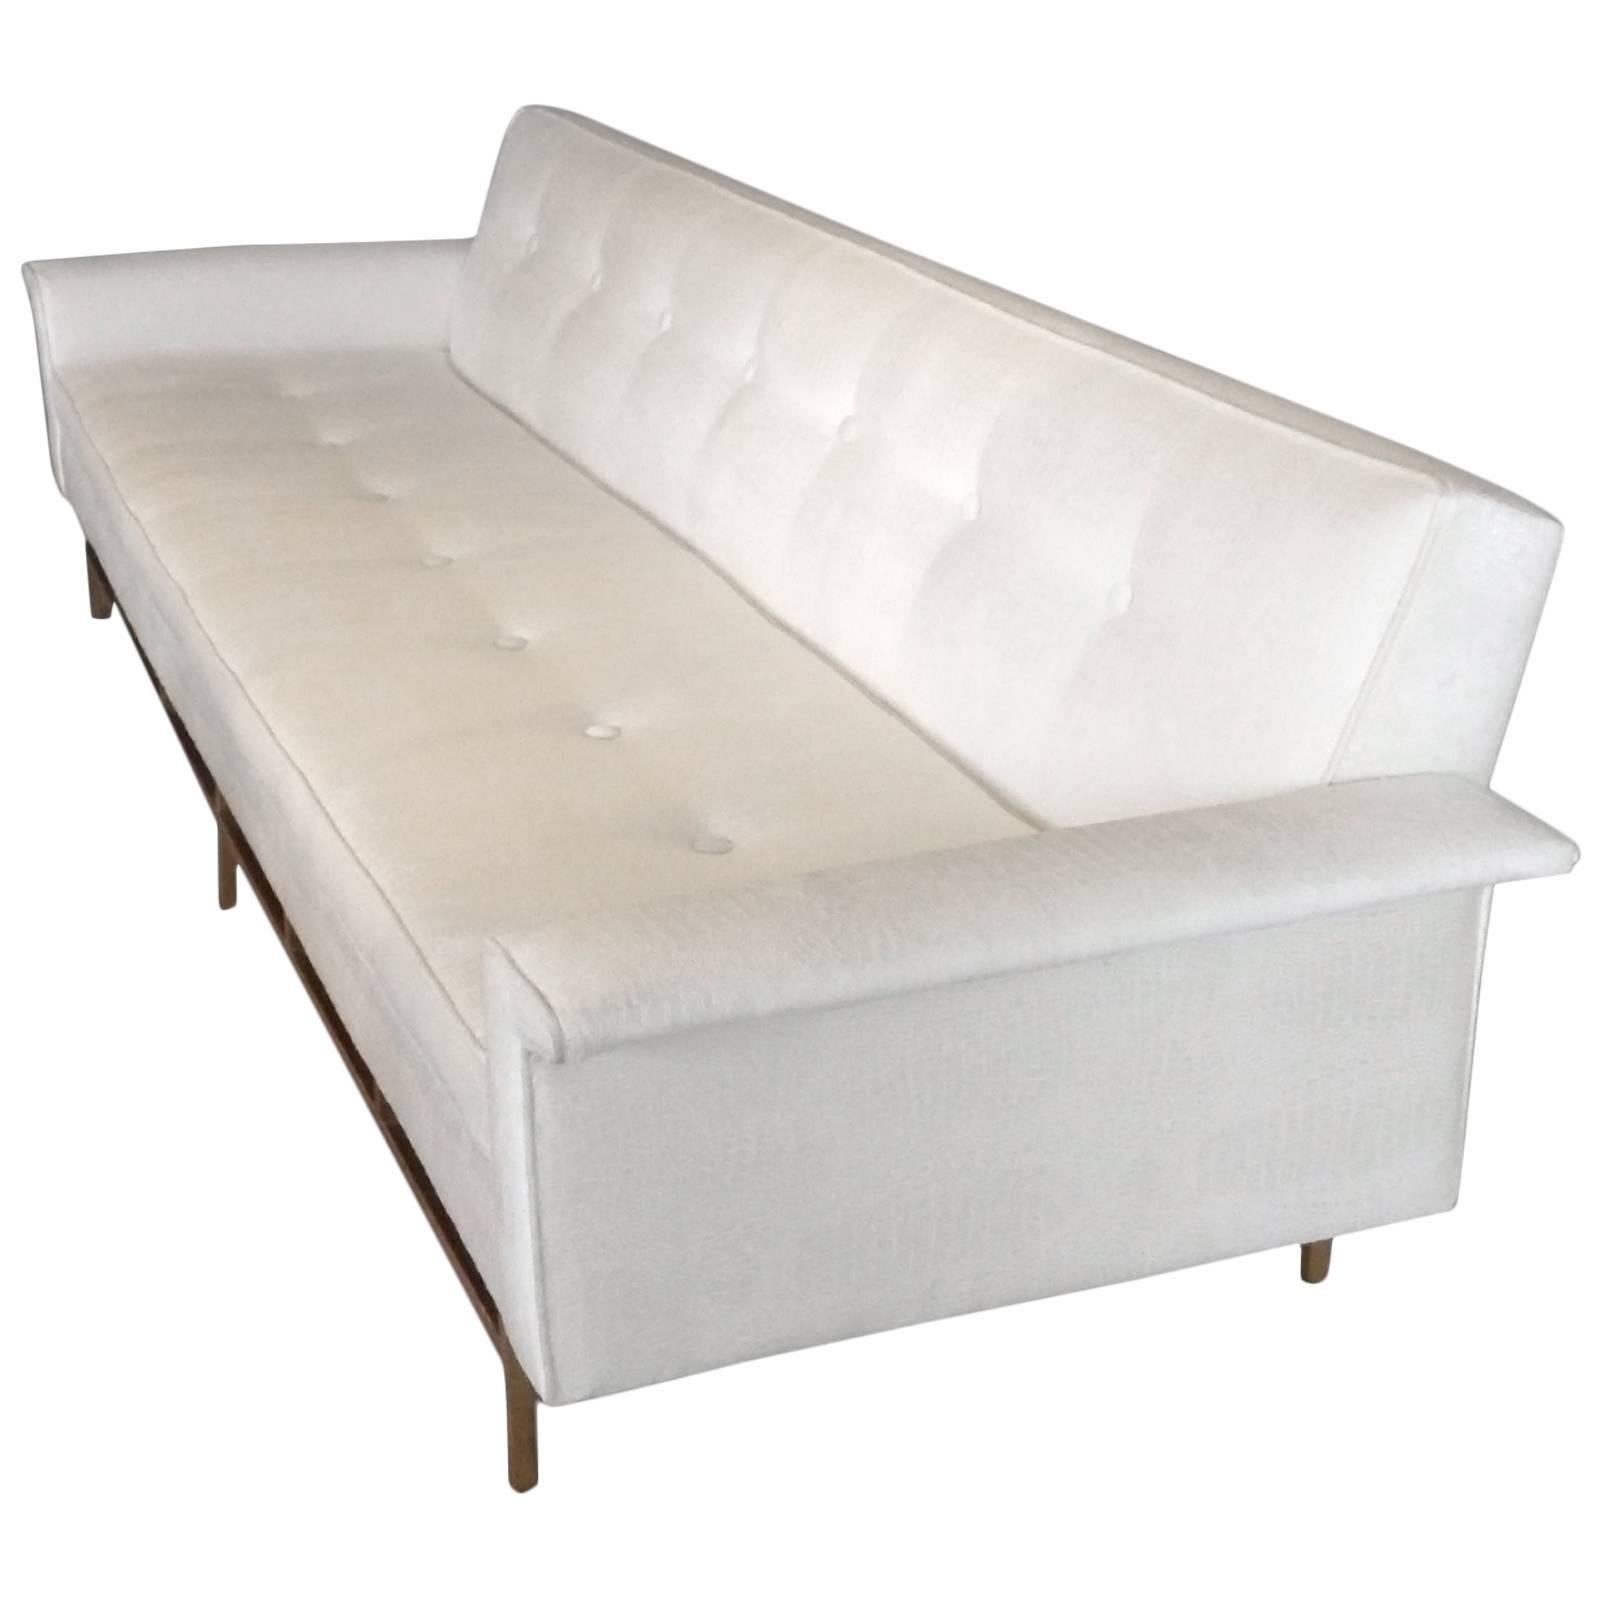 Ben Seibel for Stand Built  Dunbar style white sofa on architectural brass base